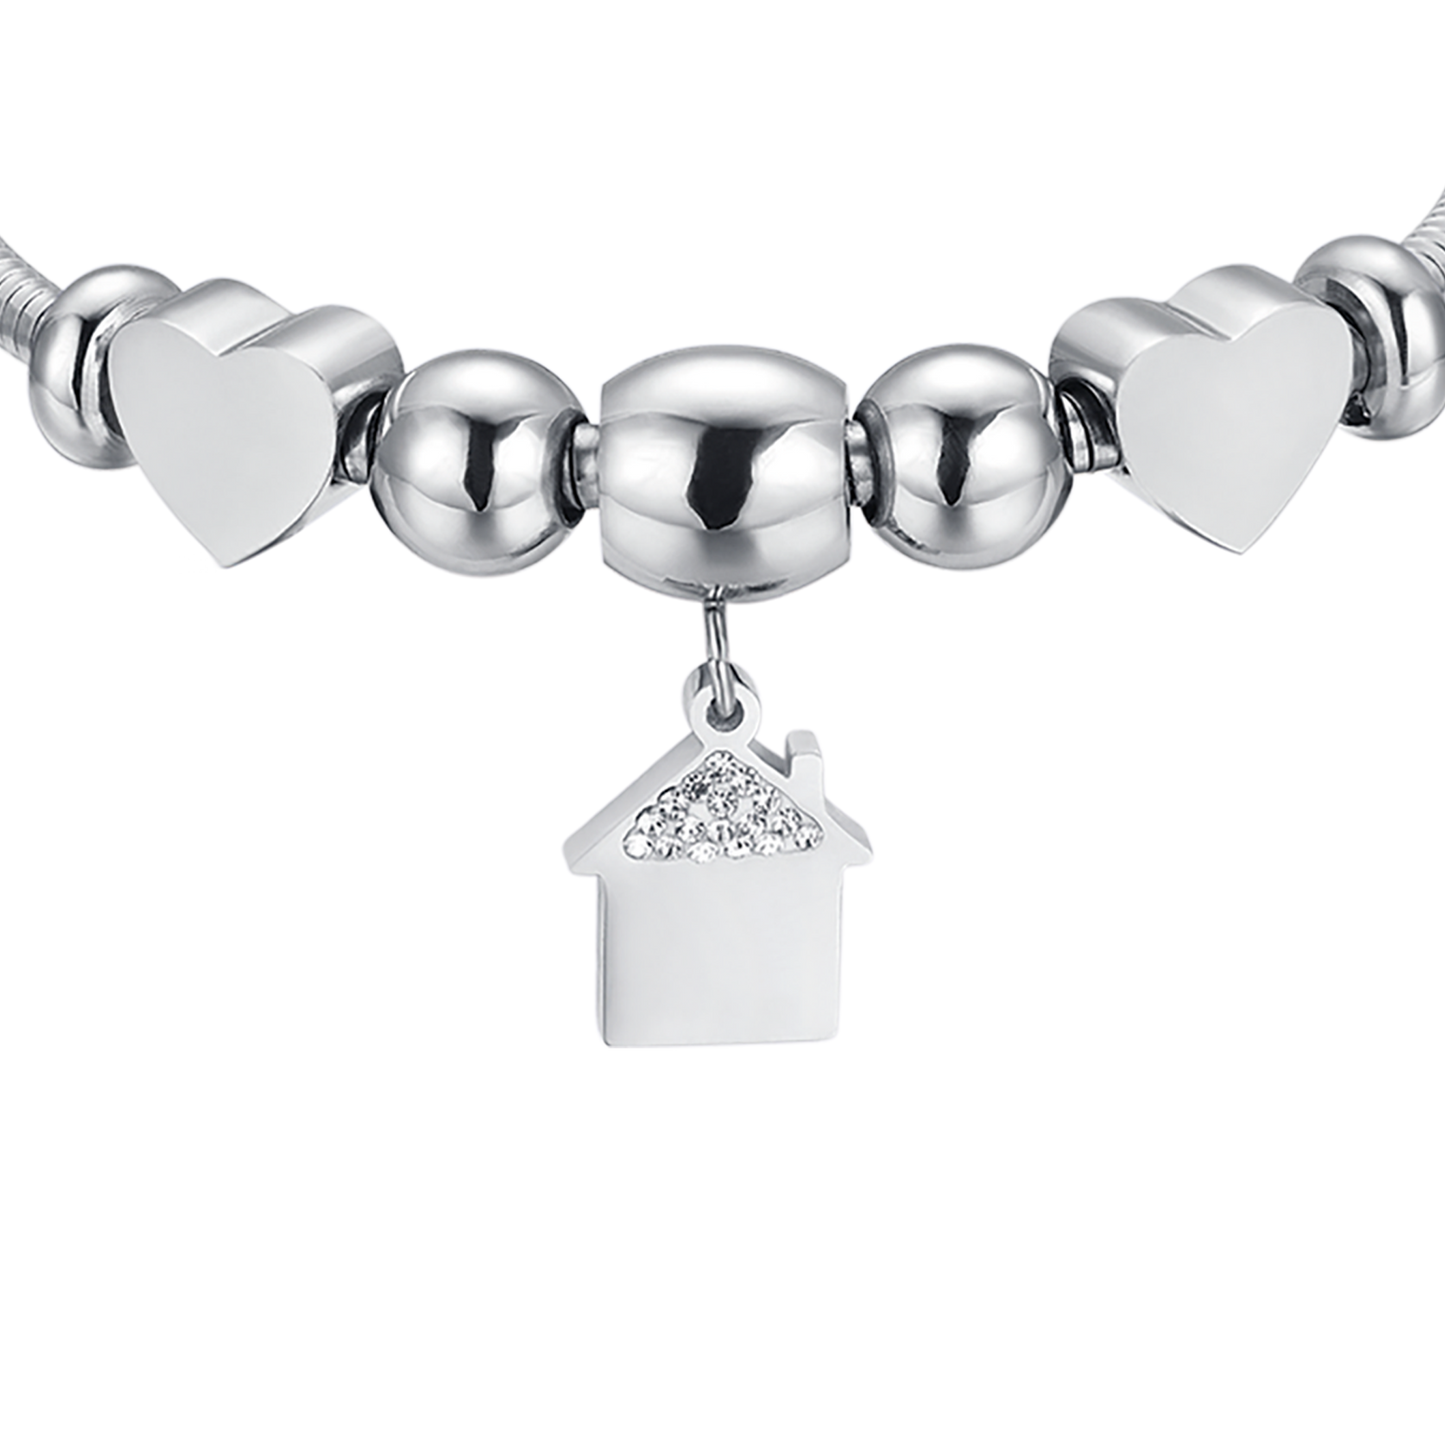 STEEL BRACELET WITH HOUSE WITH WHITE CRYSTALS AND STEEL HEARTS Luca Barra